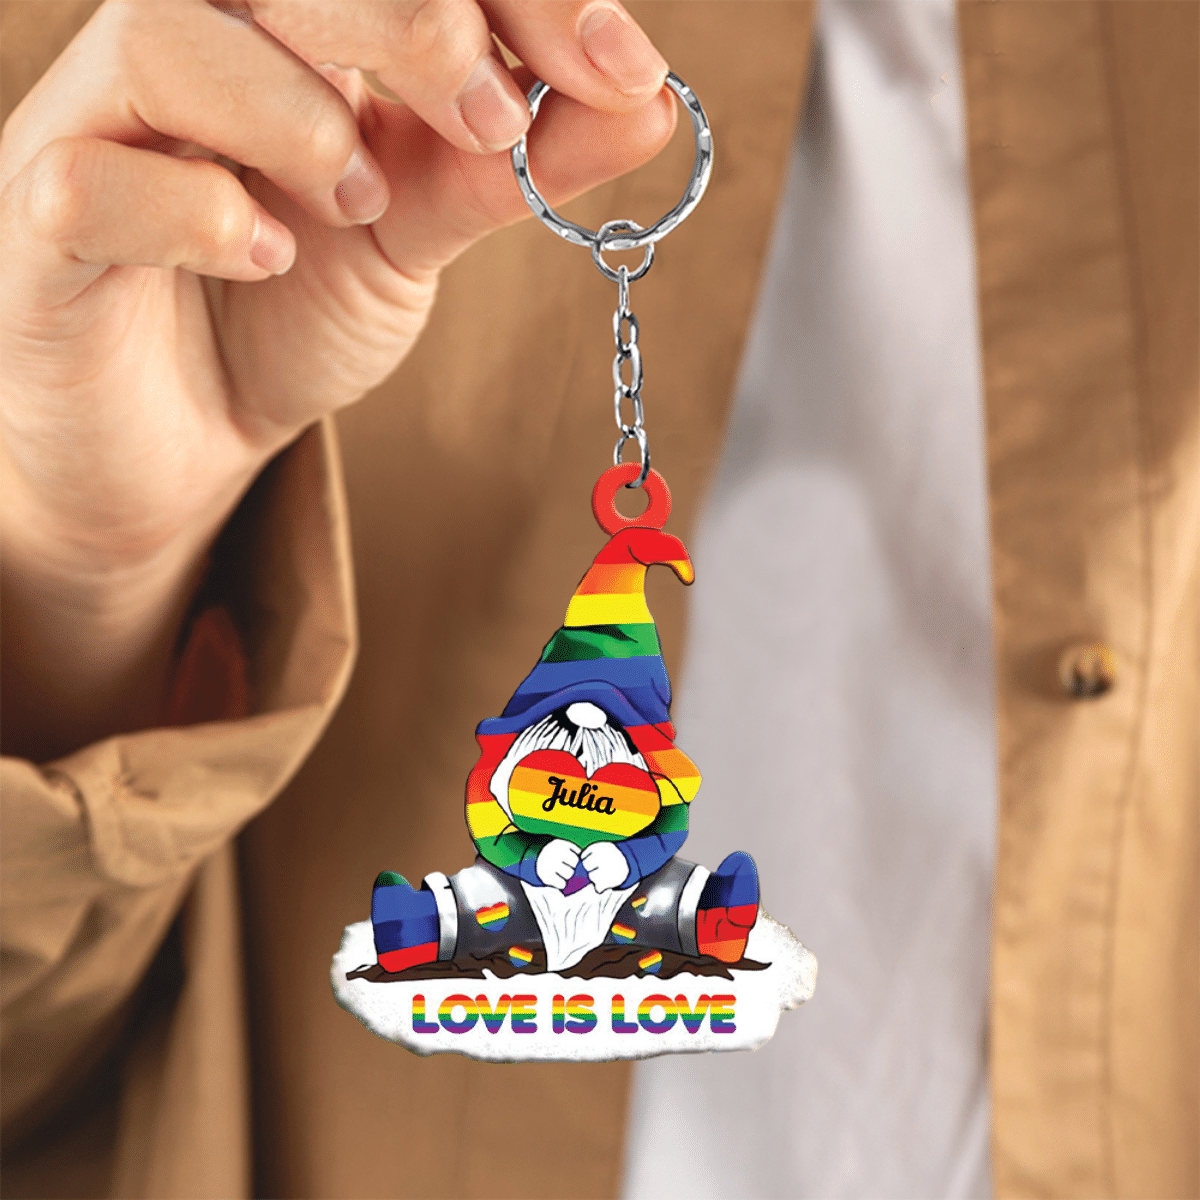 Personalized LGBT Keychain/ Custom Couple Name Acrylic LGBT Keychain for Pride Month/ Keychain for Husband and Wife